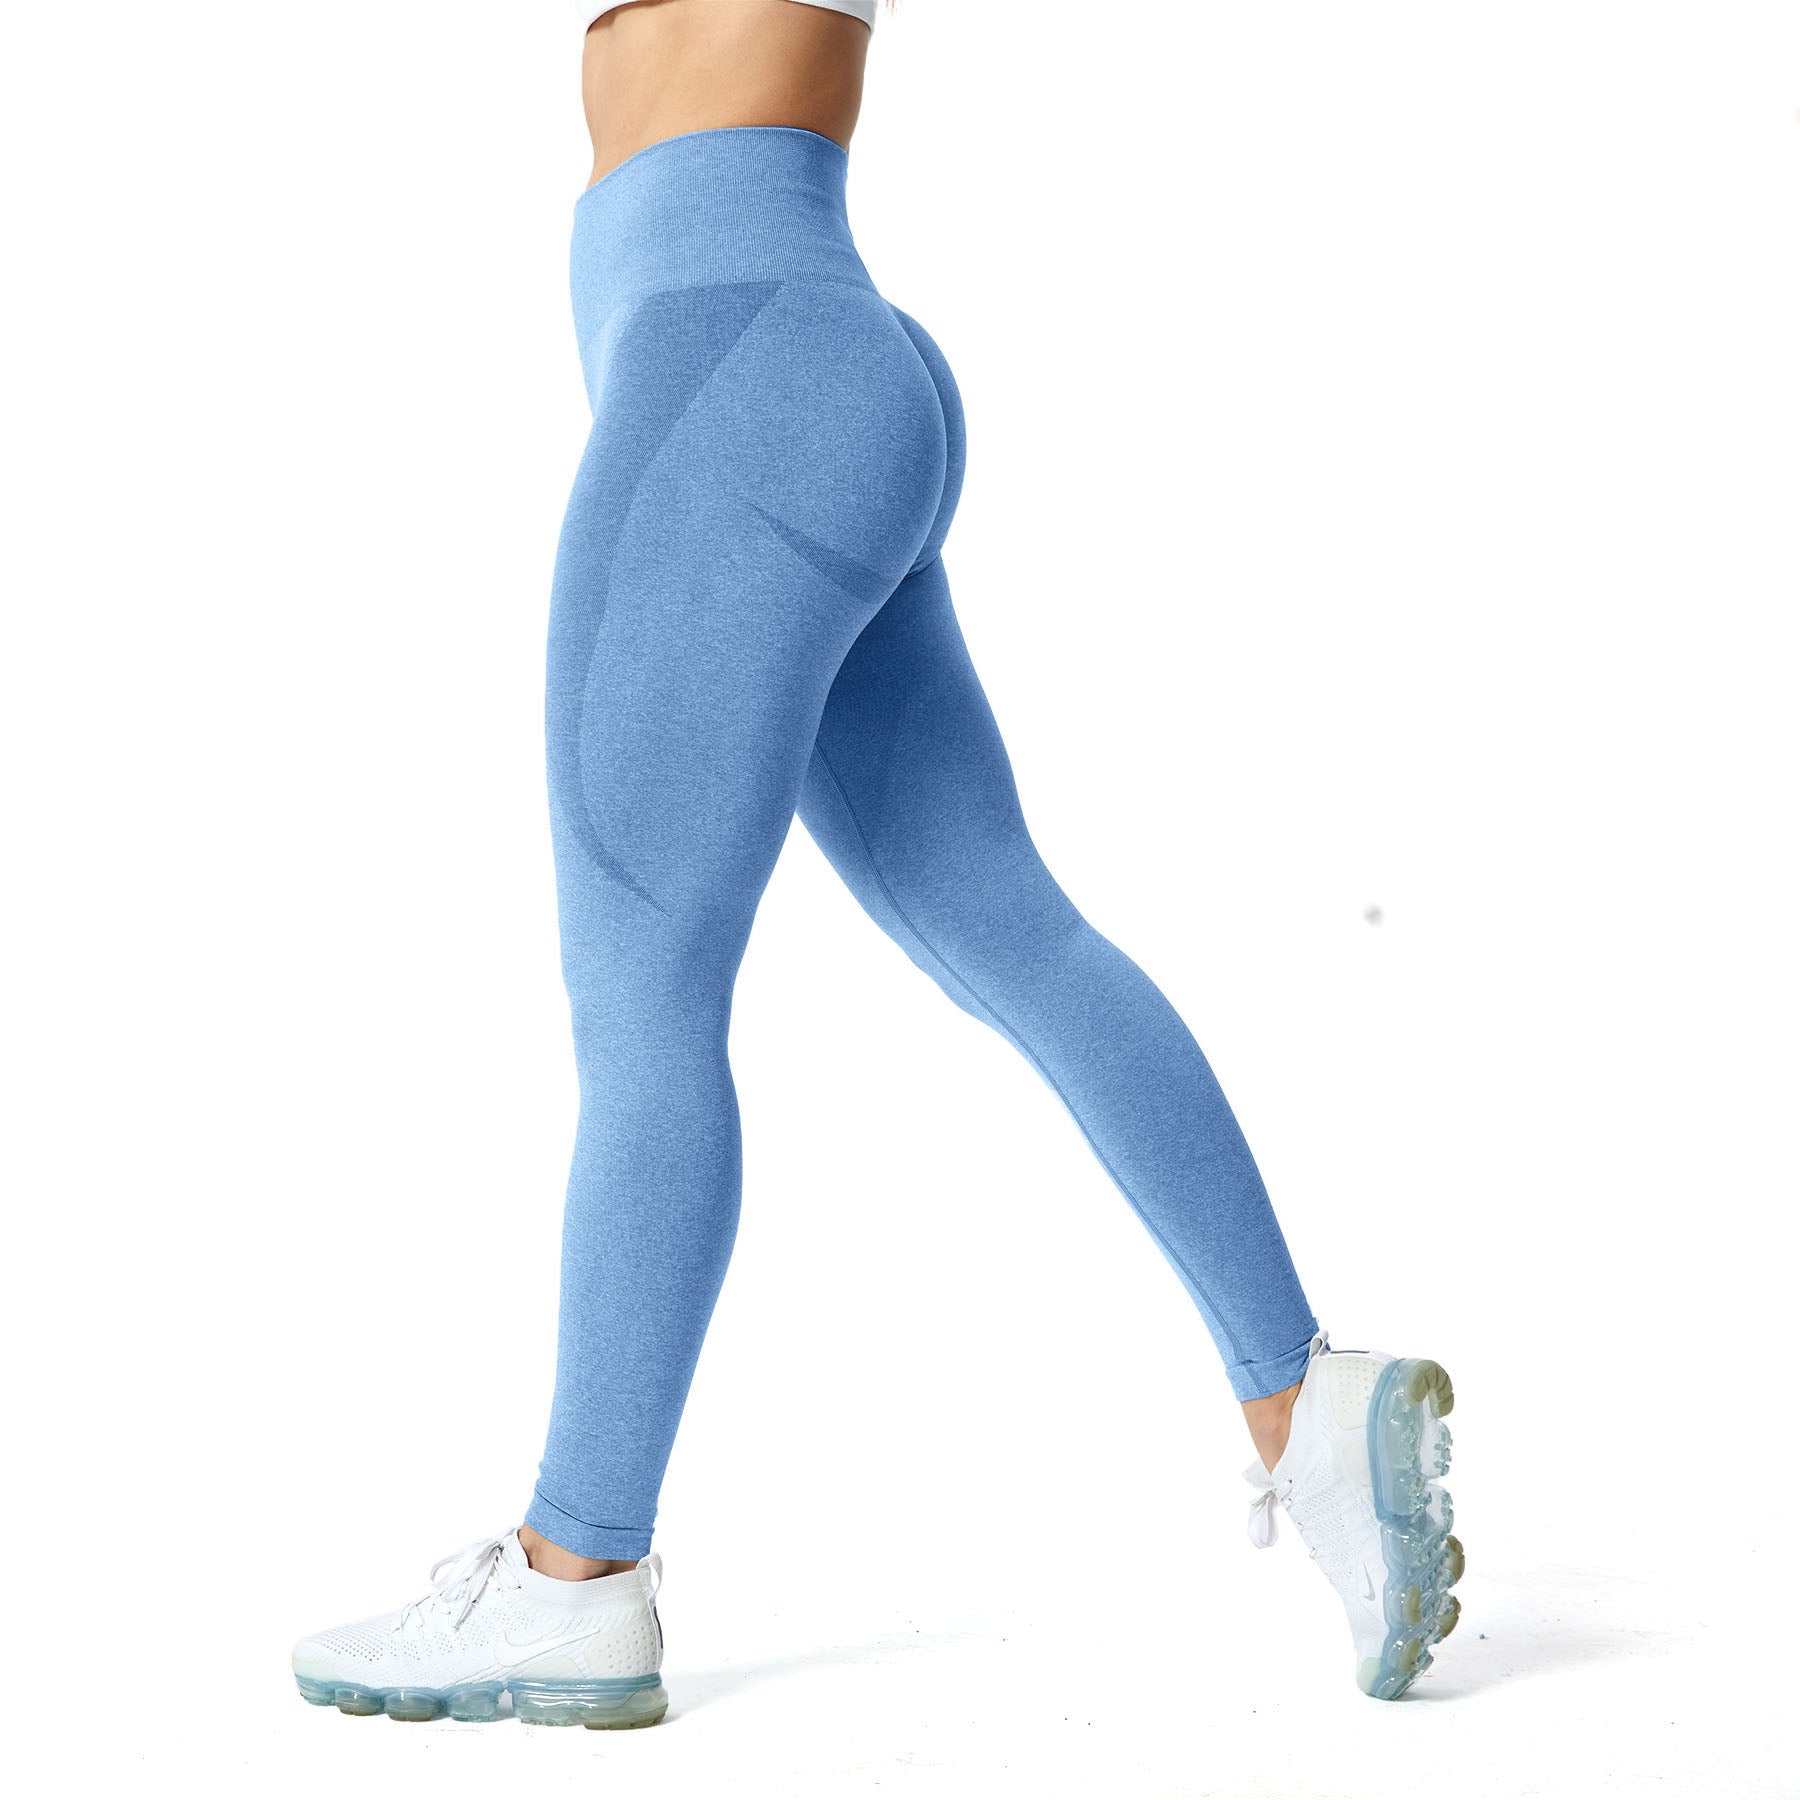 Smile contour leggings from the OLMLMT Store on ! Try these